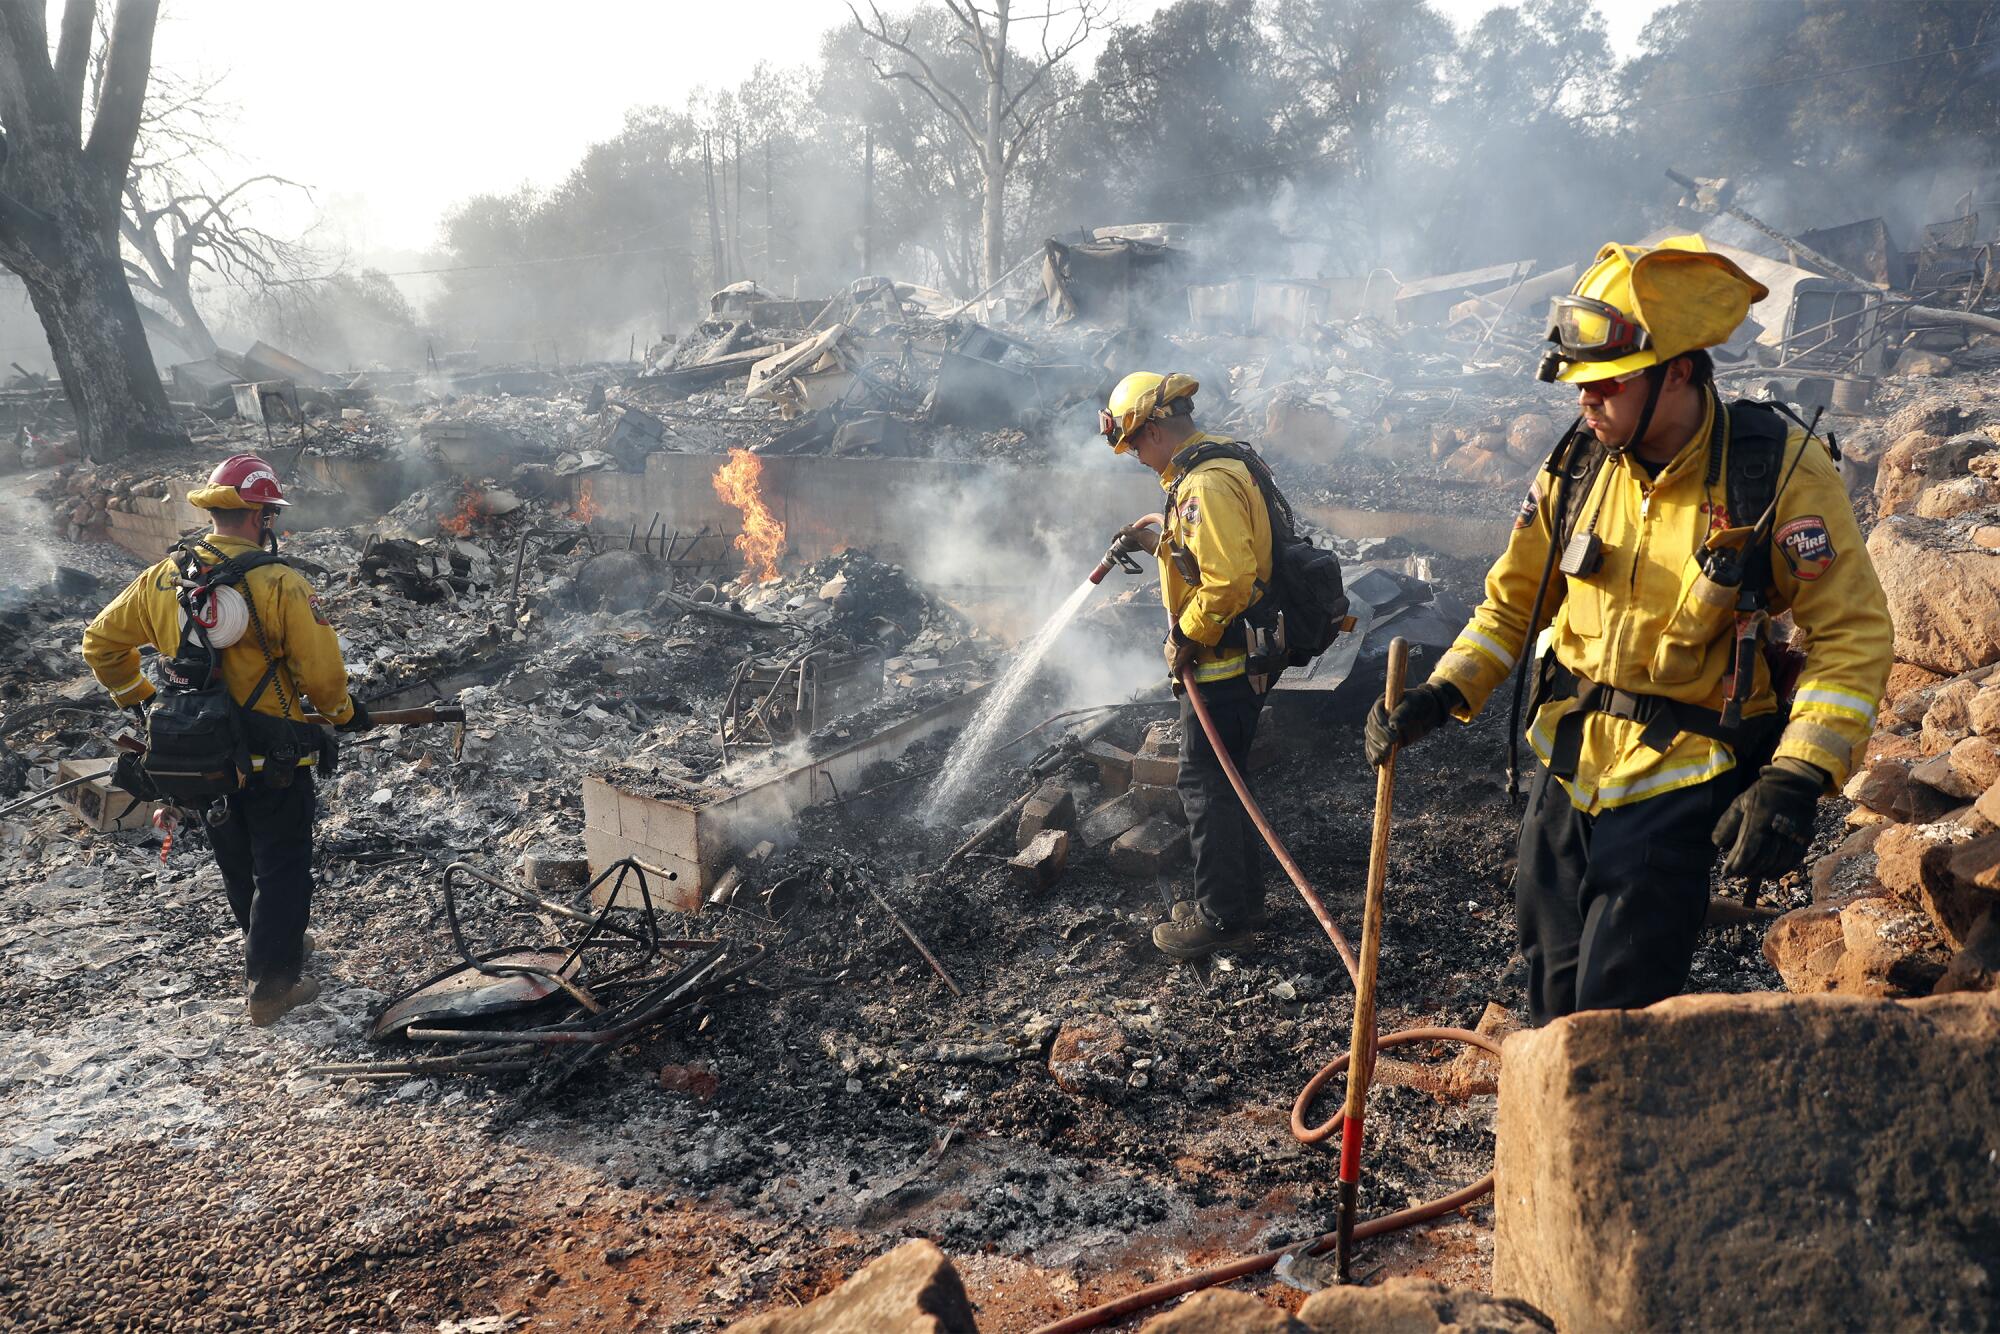 CalFire firefighters extinguish hot spots in the at Creekside Mobile Home Park during Cache Fire in Clearlake